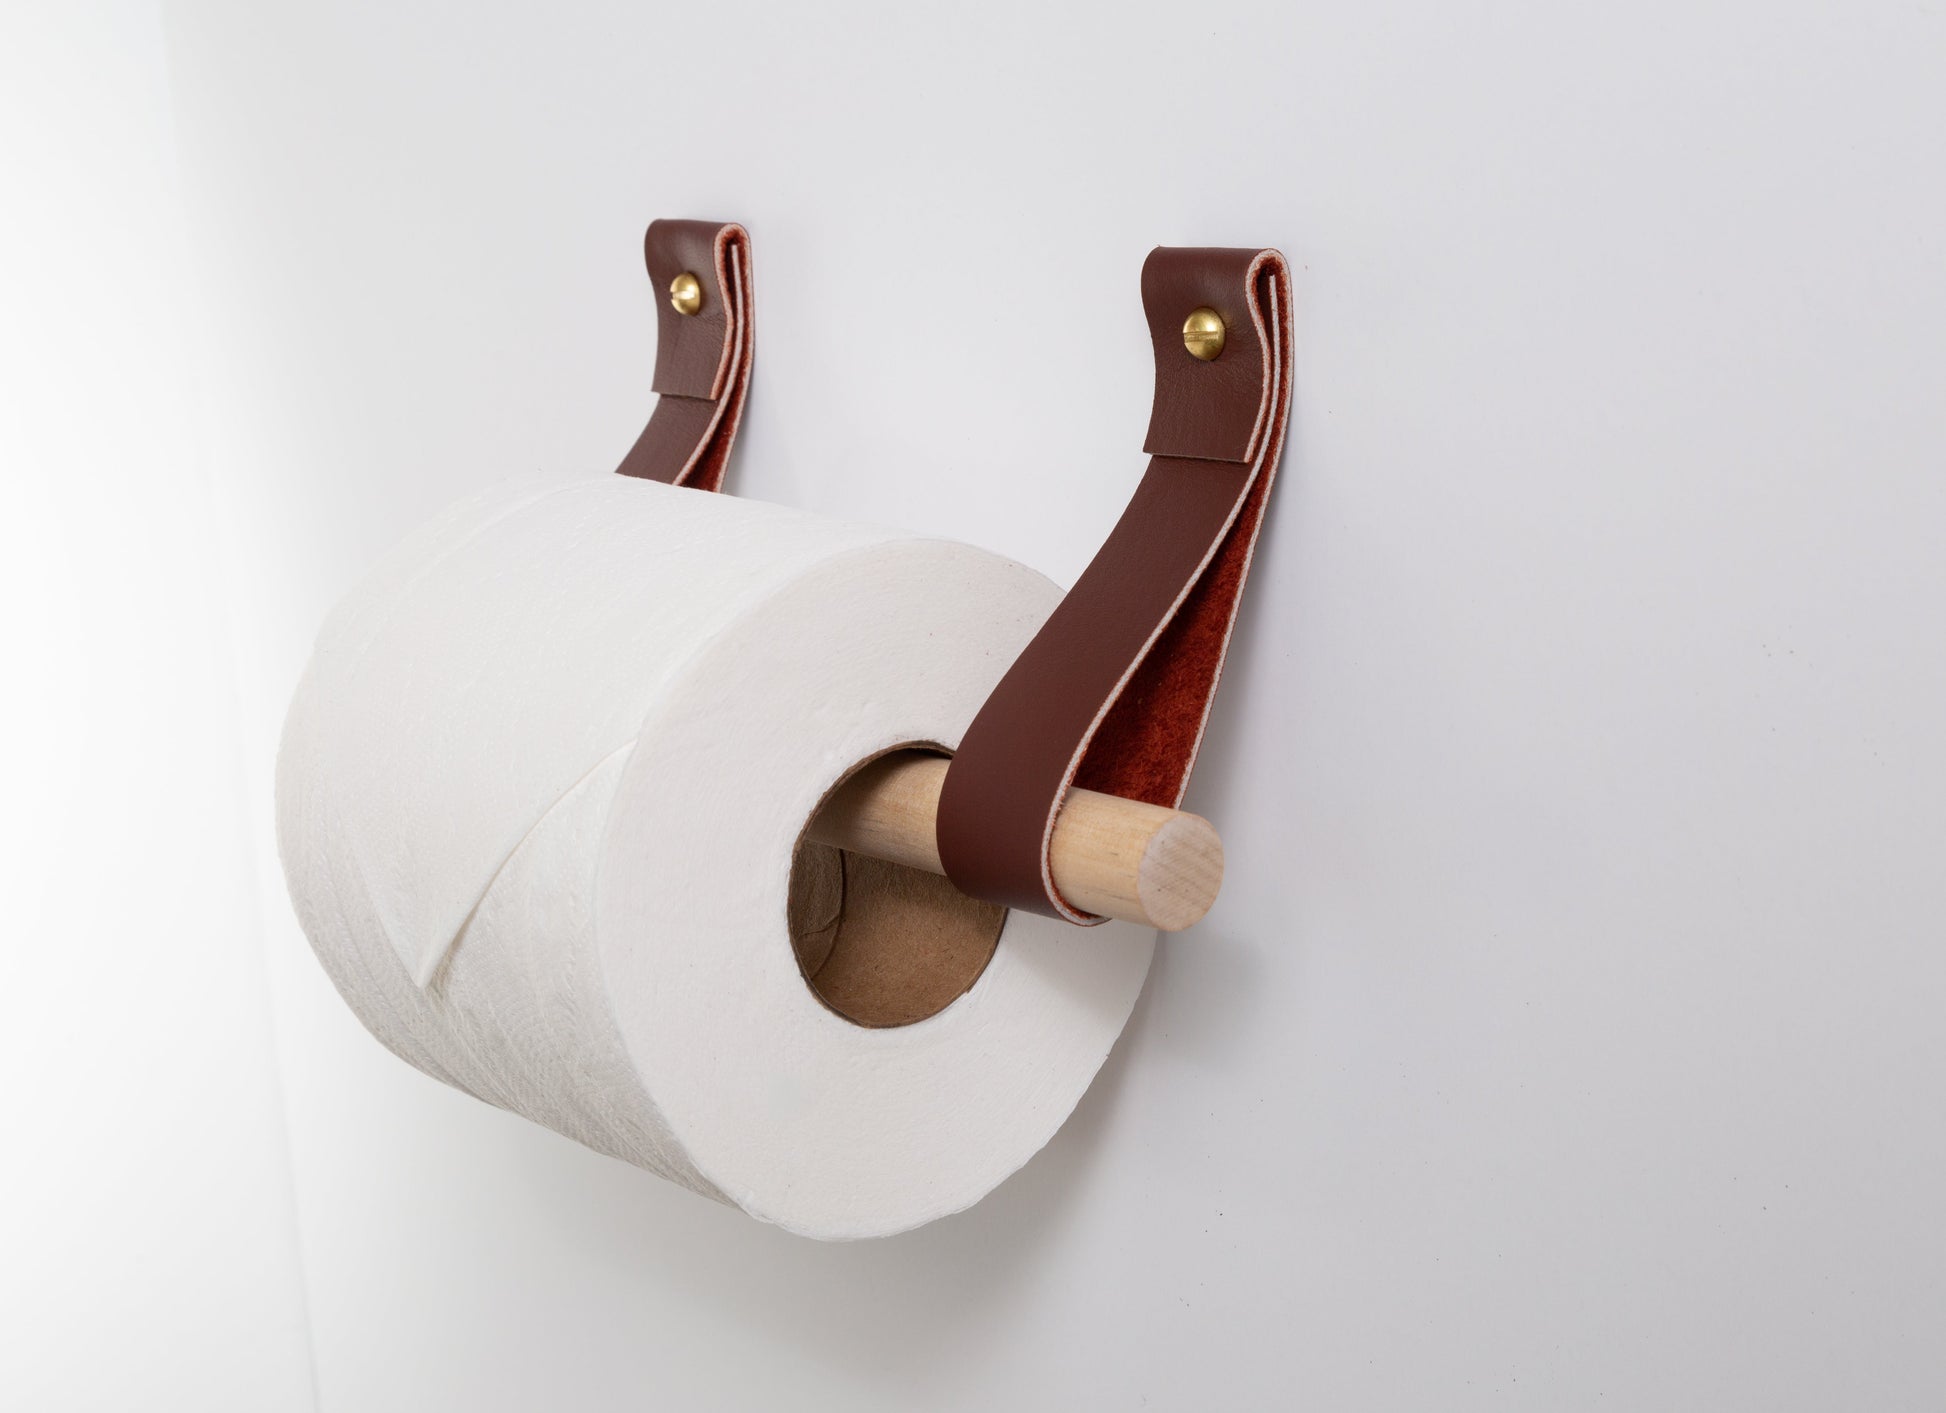 Buy Wholesale China High Quality Toilet Paper Holder With Shelf